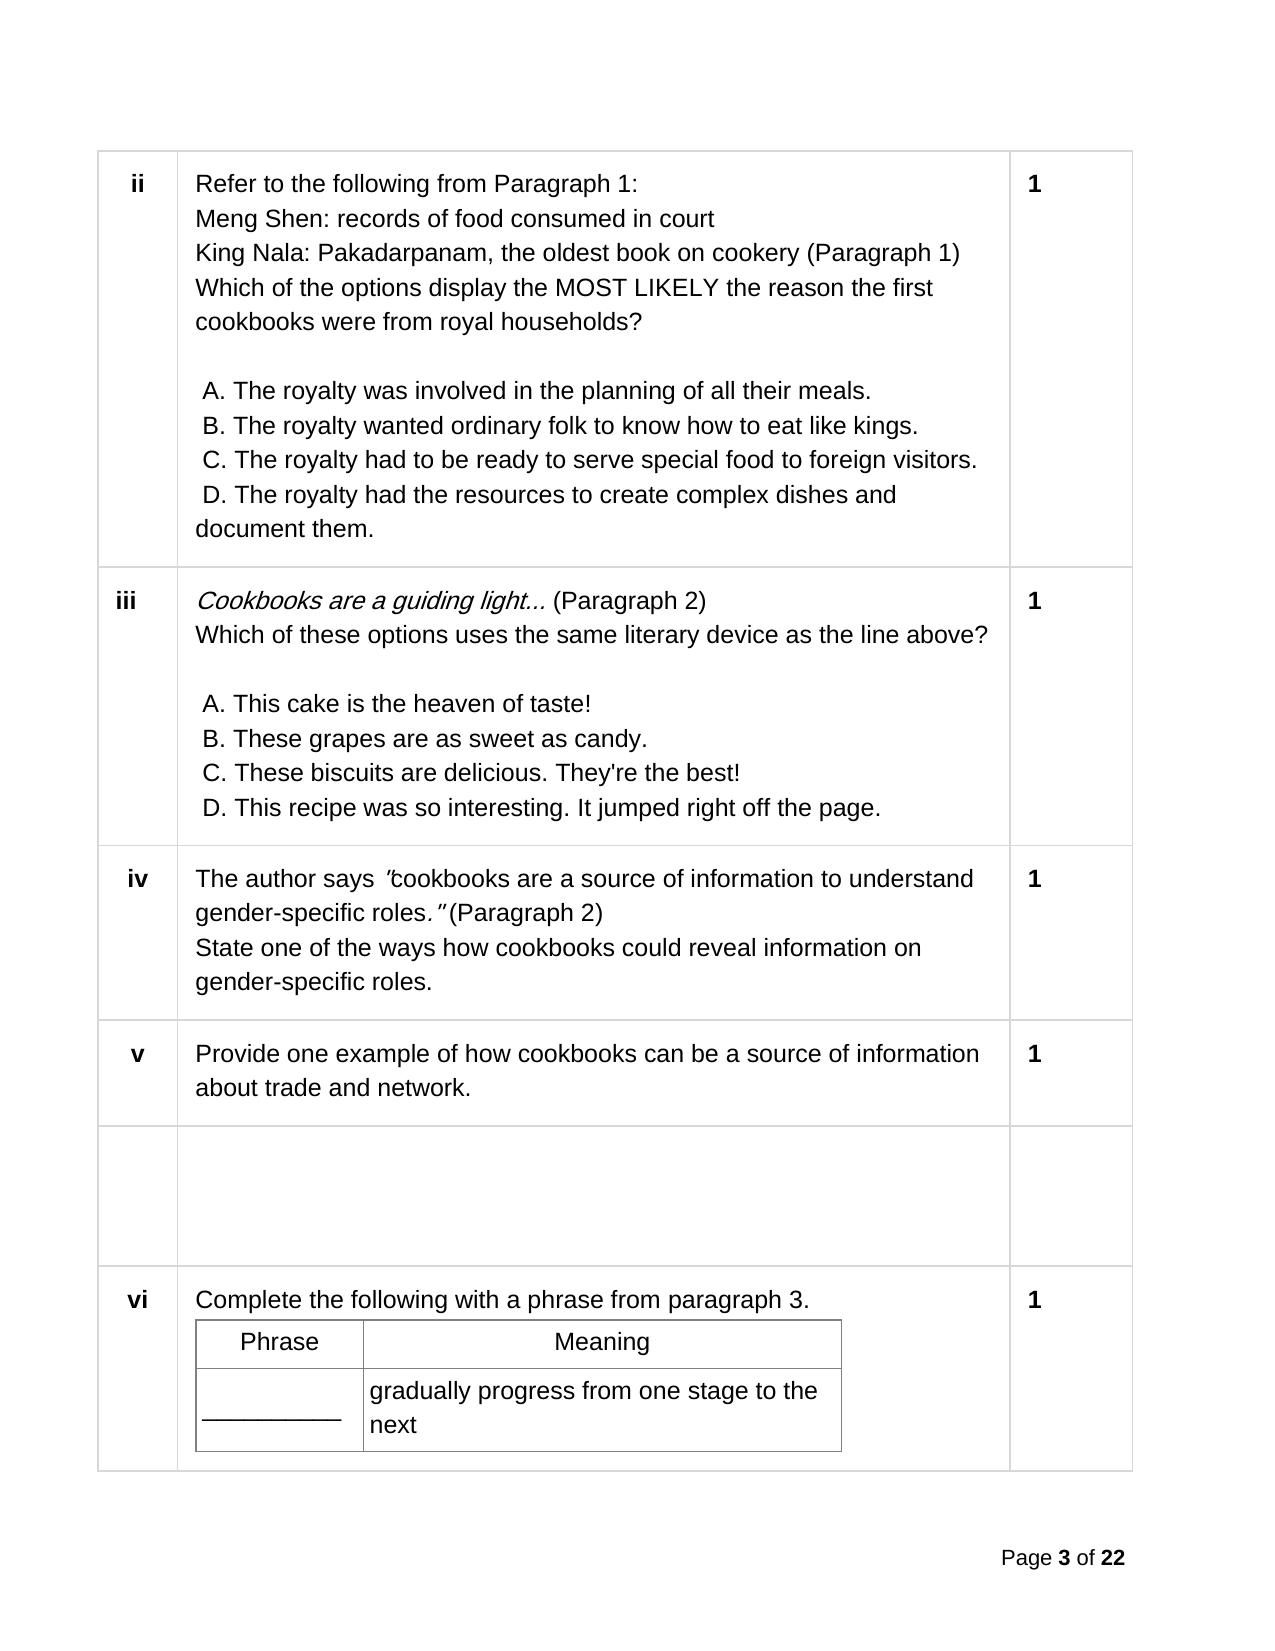 CBSE Class 10 English Practice Questions 2022-23 - Page 3